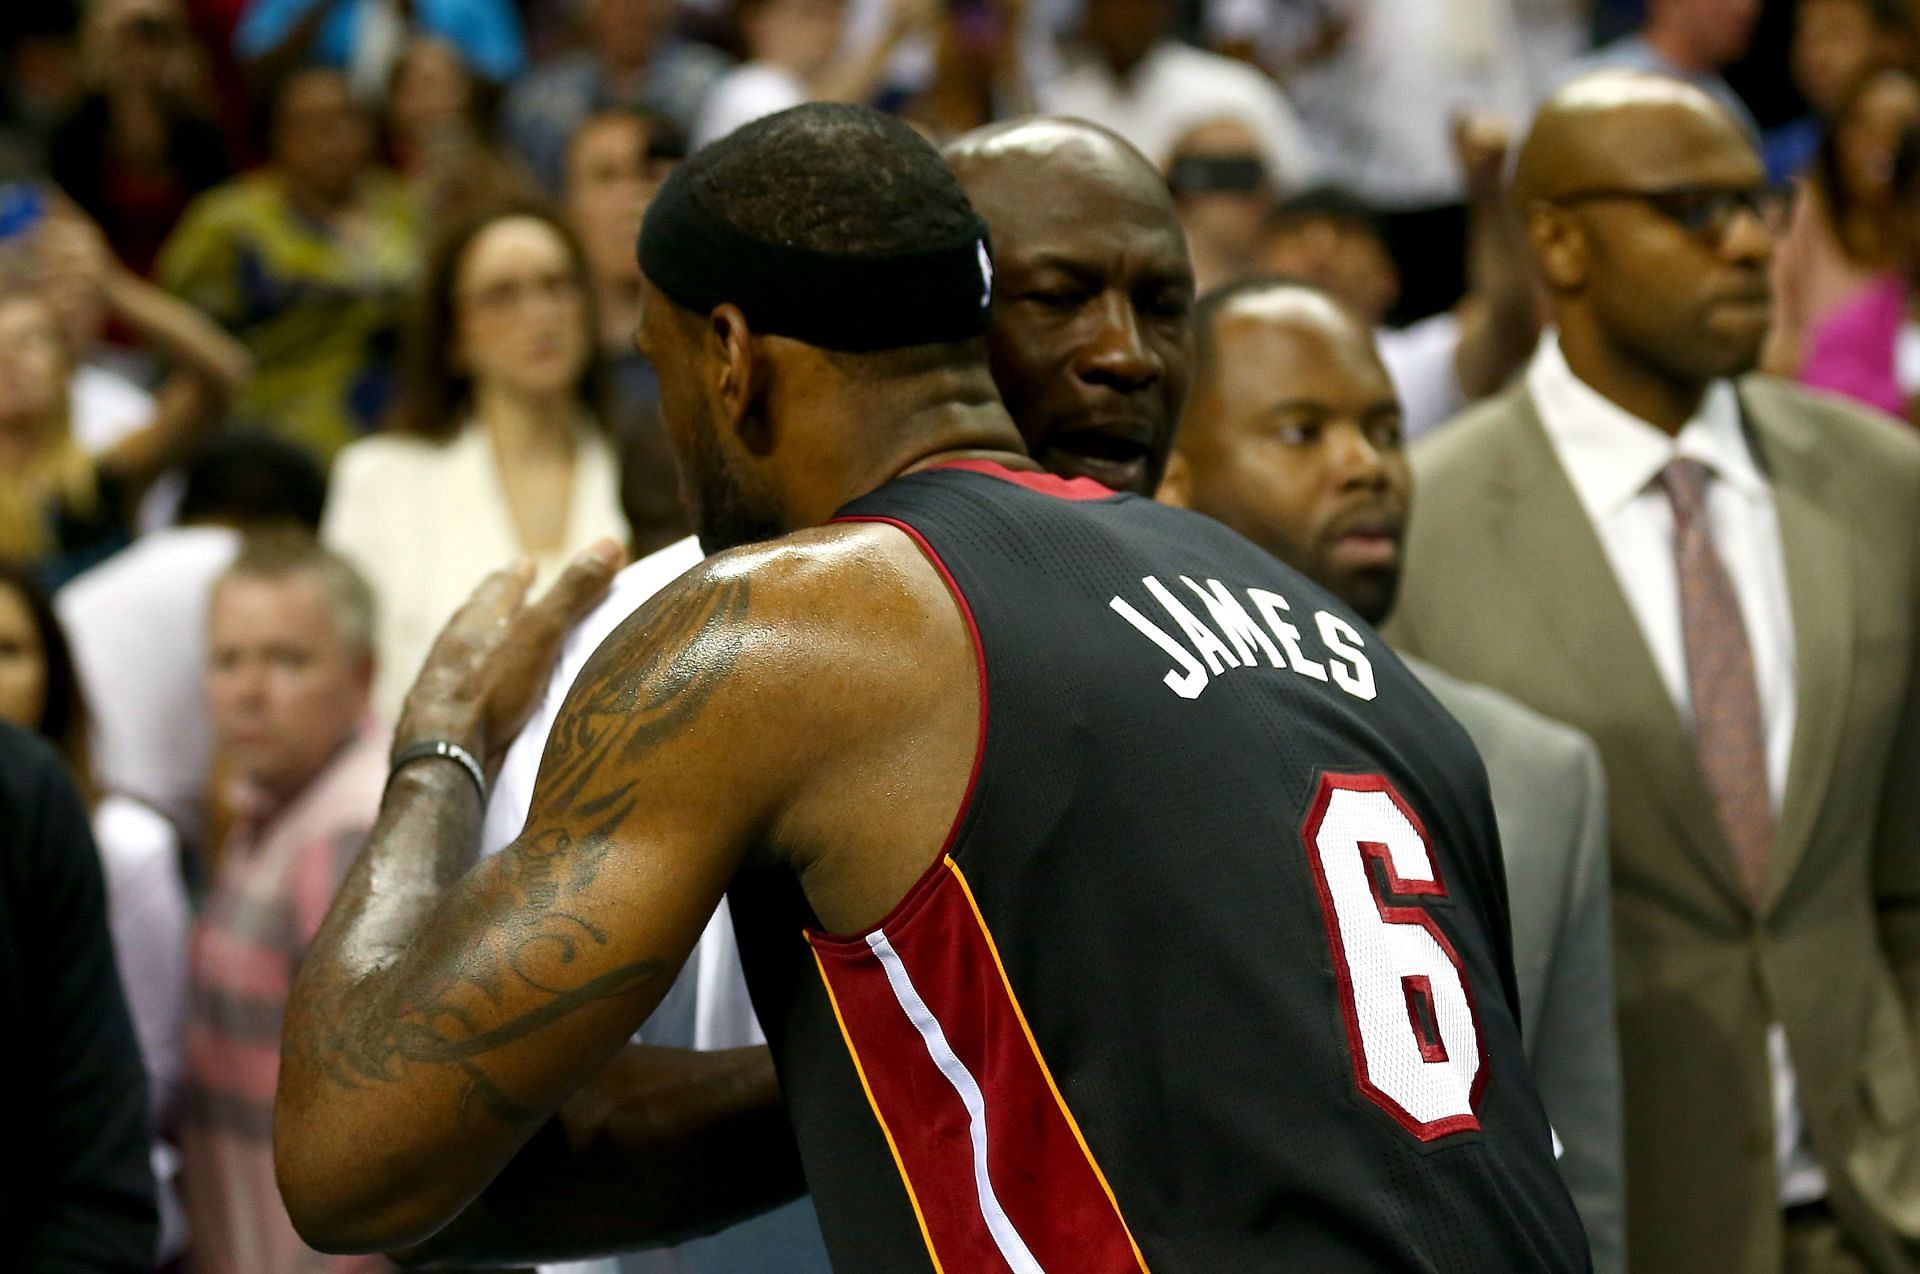 Michael Jordan and LeBron James (right) in the 2014 NBA Playoffs